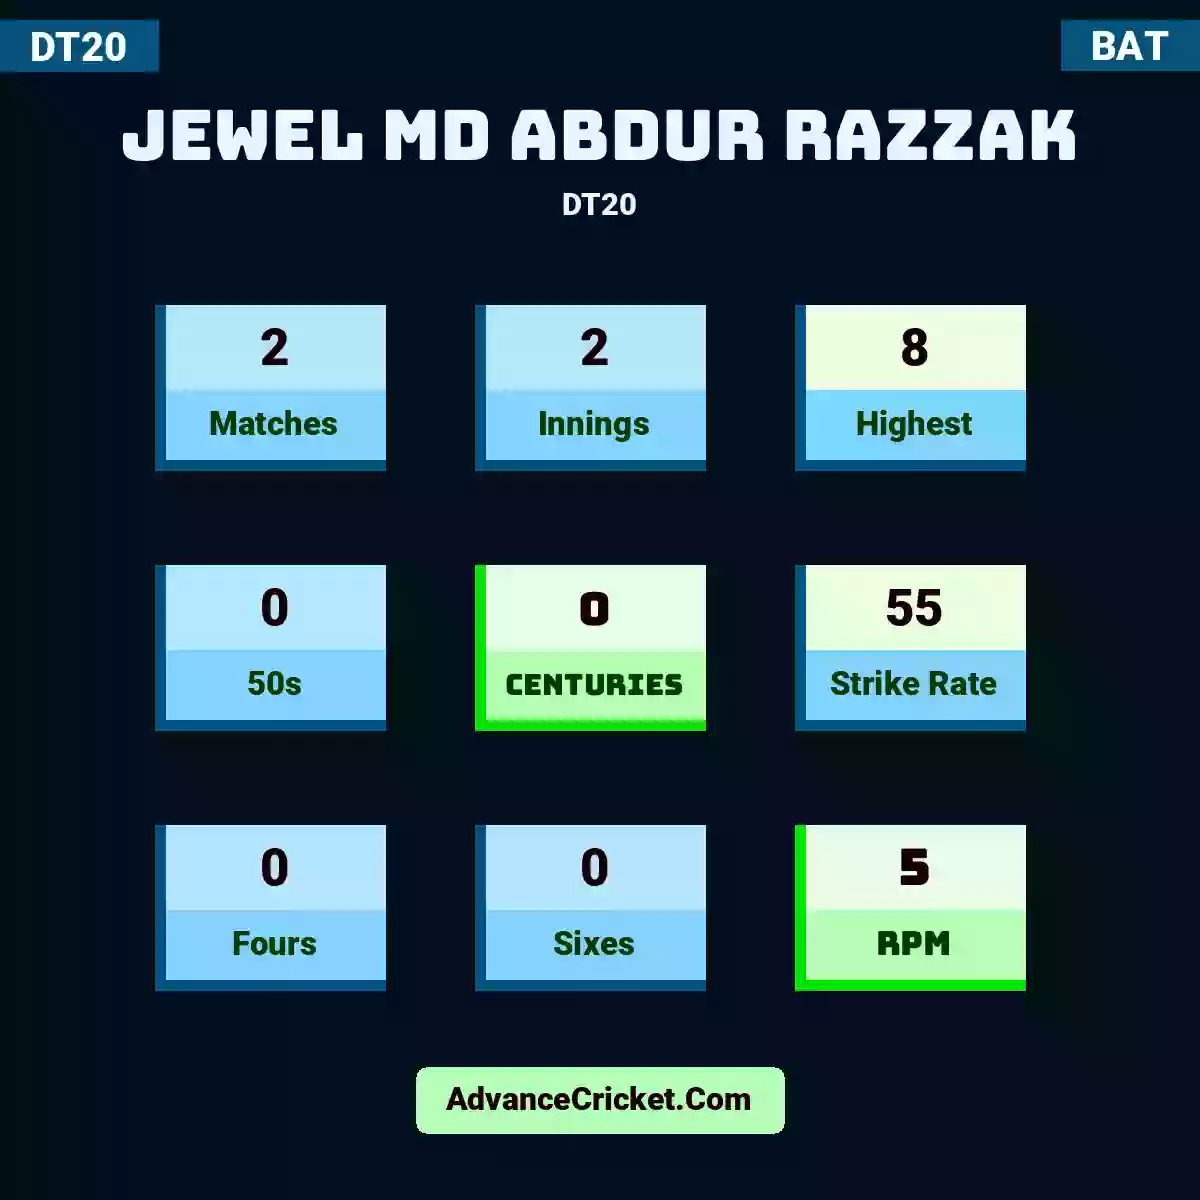 Jewel Md Abdur Razzak DT20 , Jewel Md Abdur Razzak played 2 matches, scored 8 runs as highest, 0 half-centuries, and 0 centuries, with a strike rate of 55. J.Md.Abdur.Razzak hit 0 fours and 0 sixes, with an RPM of 5.